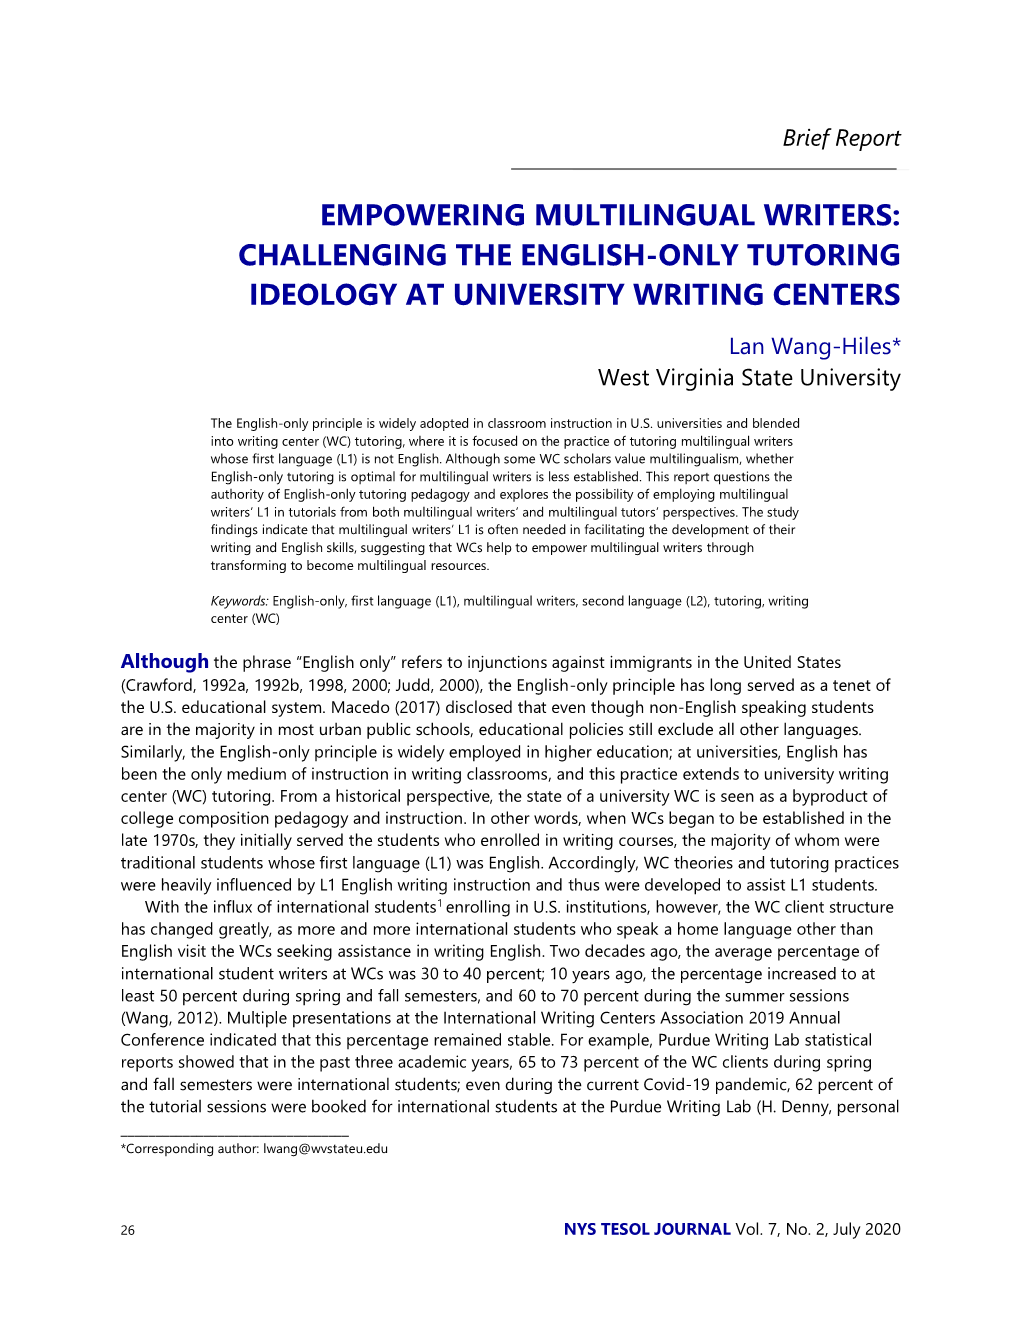 Empowering Multilingual Writers: Challenging the English-Only Tutoring Ideology at University Writing Centers